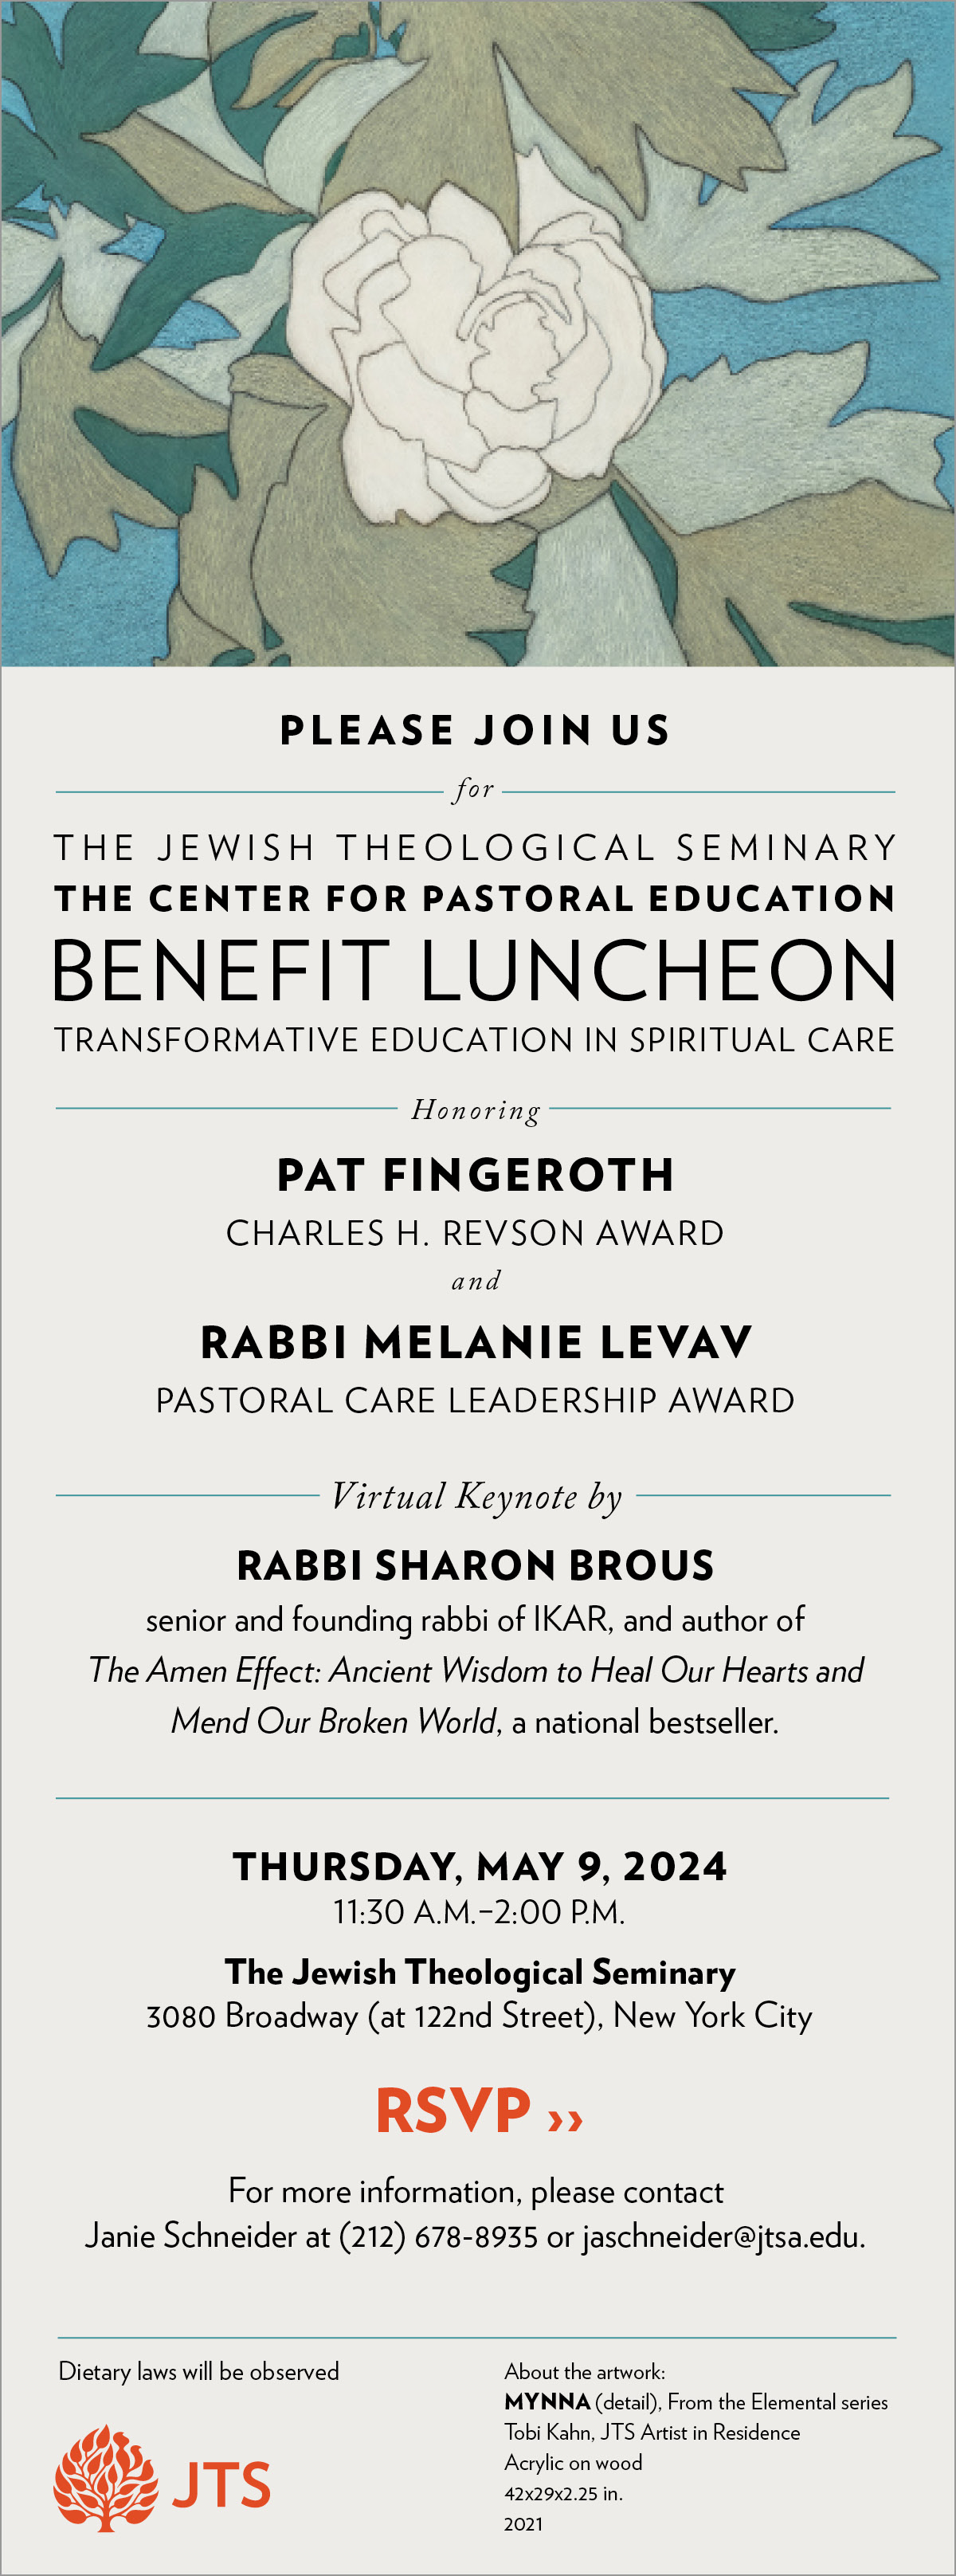 Save the date on Thursday, May 9 for The Center for Pastoral Education Benefit Luncheon. 